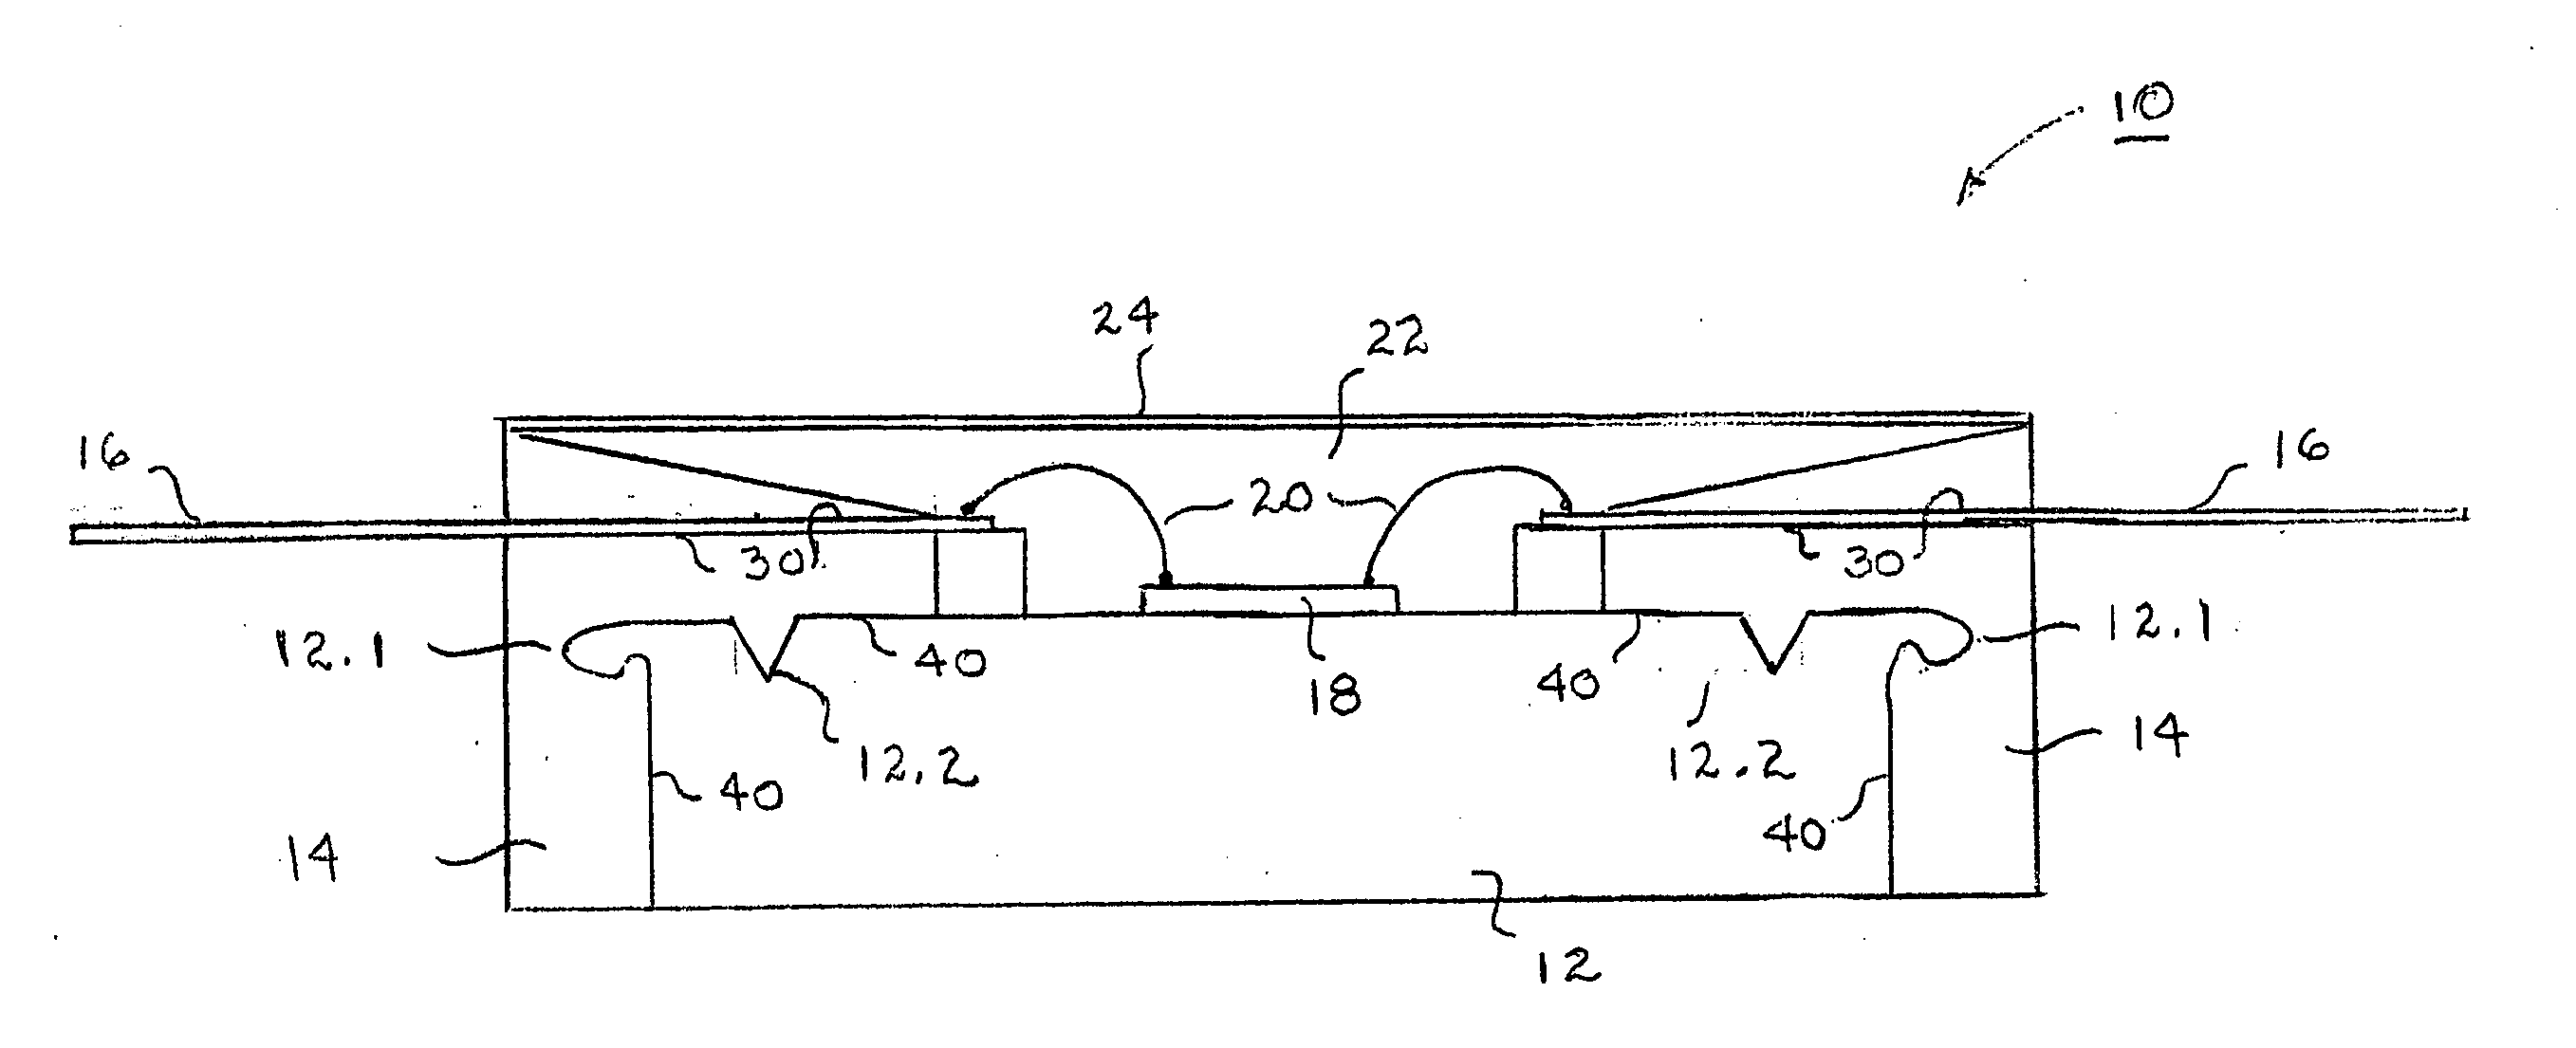 Semiconductor device package with base features to reduce leakage